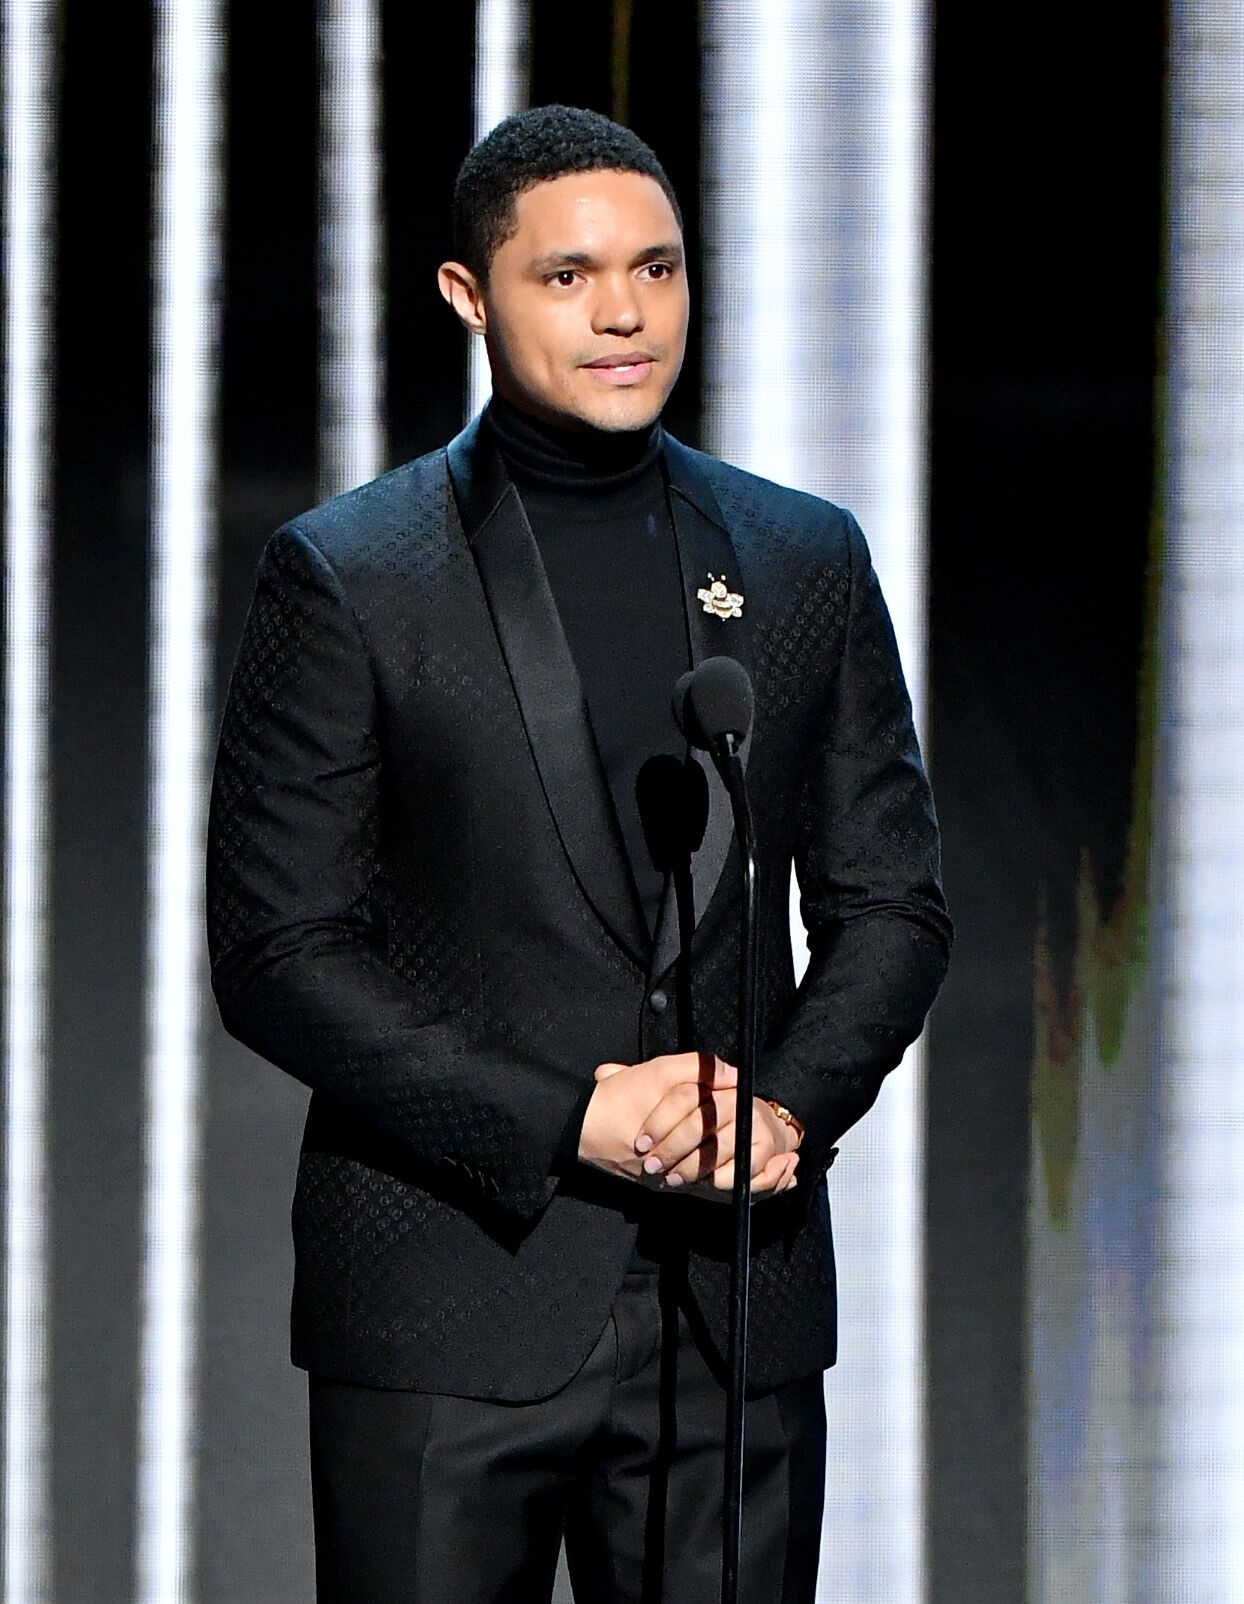 Trevor Noah onstage at the 50th NAACP Image Awards in 2019 in Hollywood | Source: Getty Images